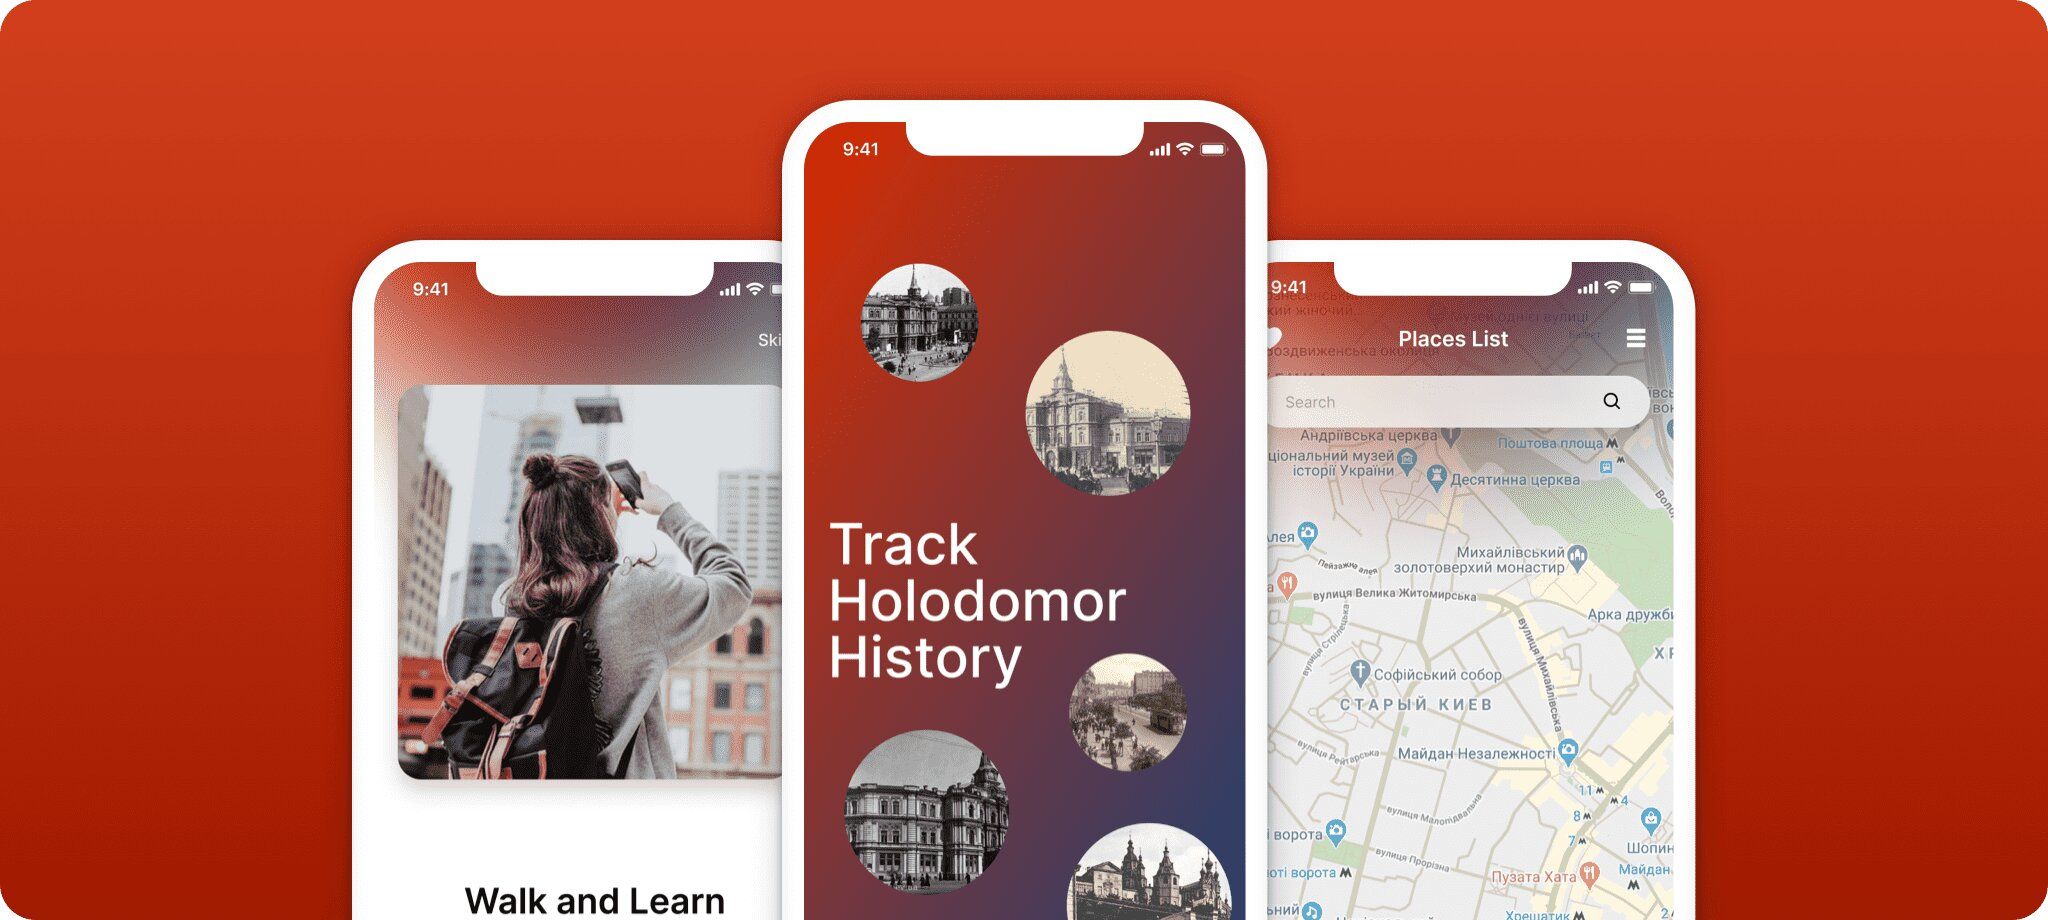 Such an app helped the National Holodomor Museum to improve digital loyalty (*image by [Stormotion](https://stormotion.io/product/track-holodomor-history/){ rel="nofollow" target="_blank" .default-md}*)